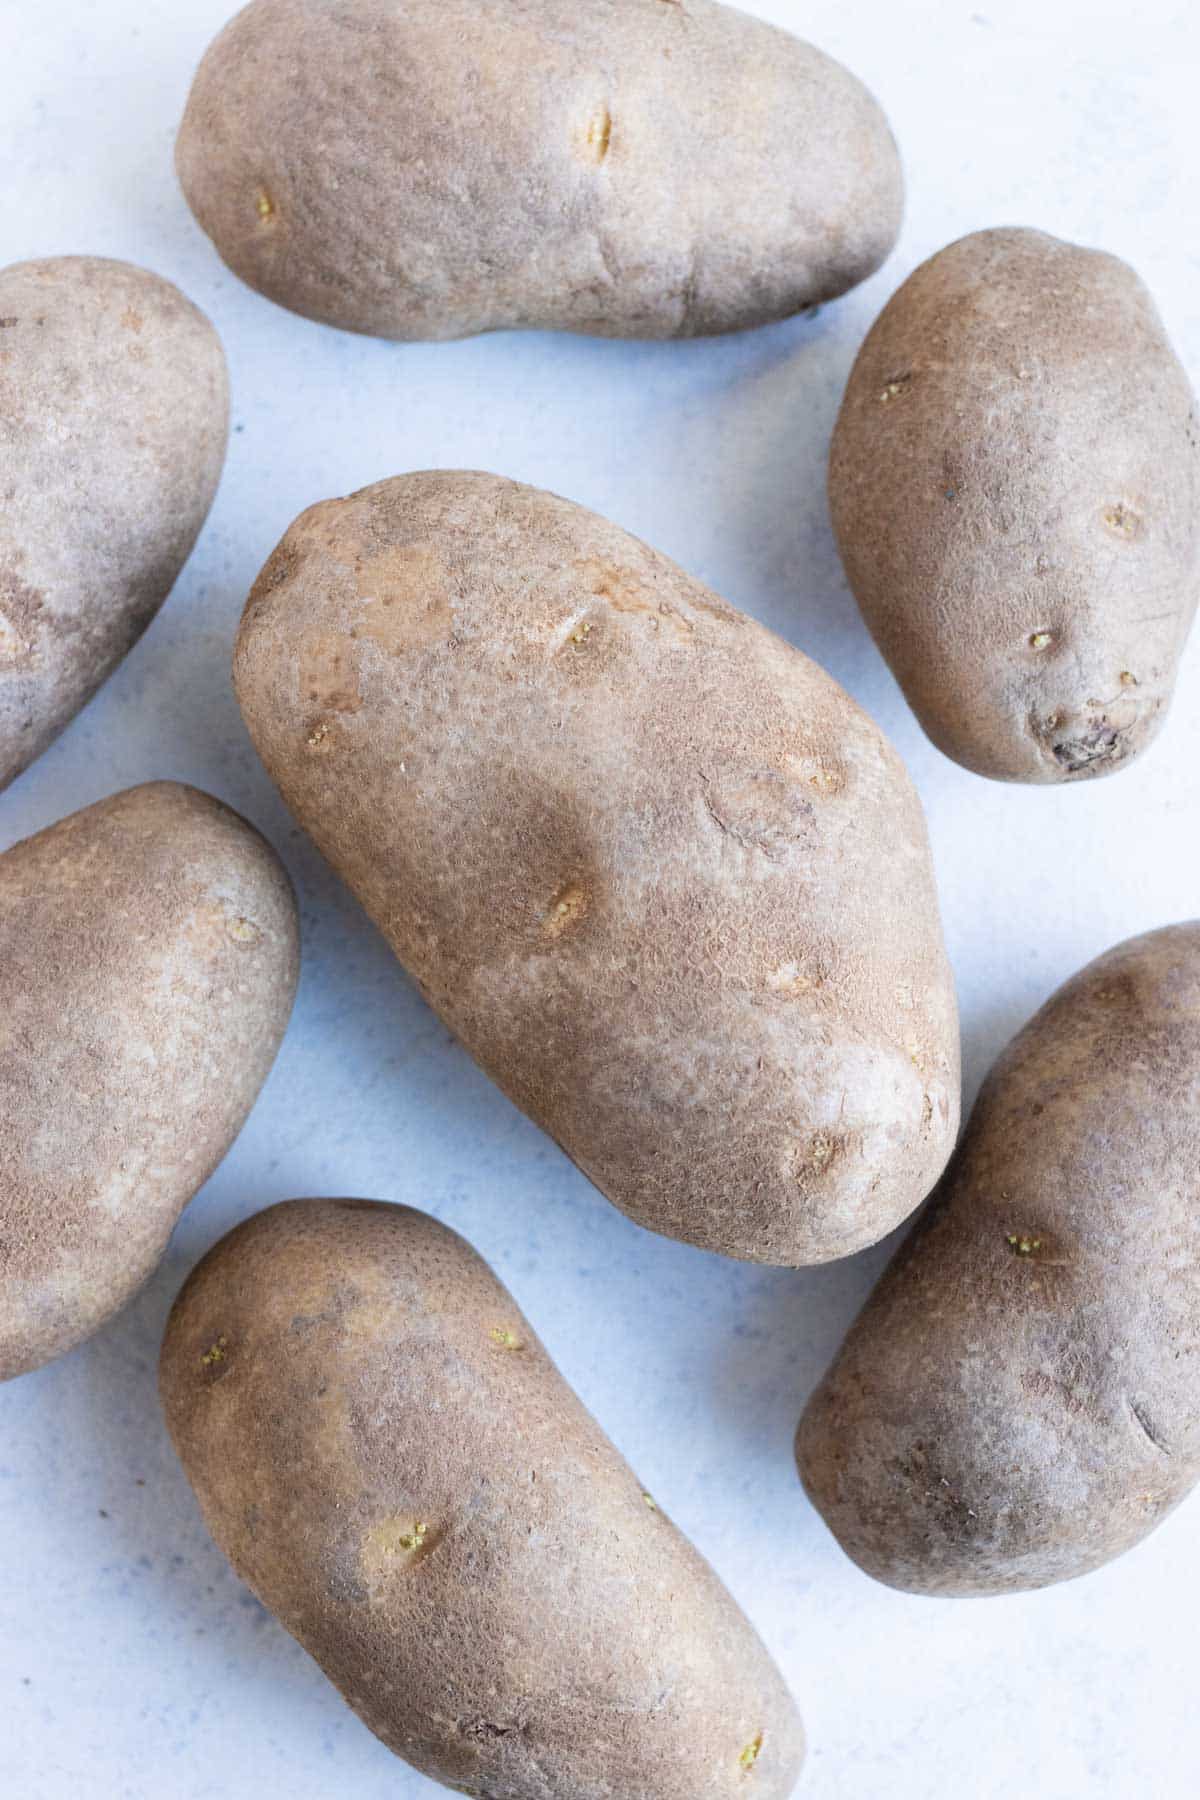 Multiple potatoes sitting on the countertop.